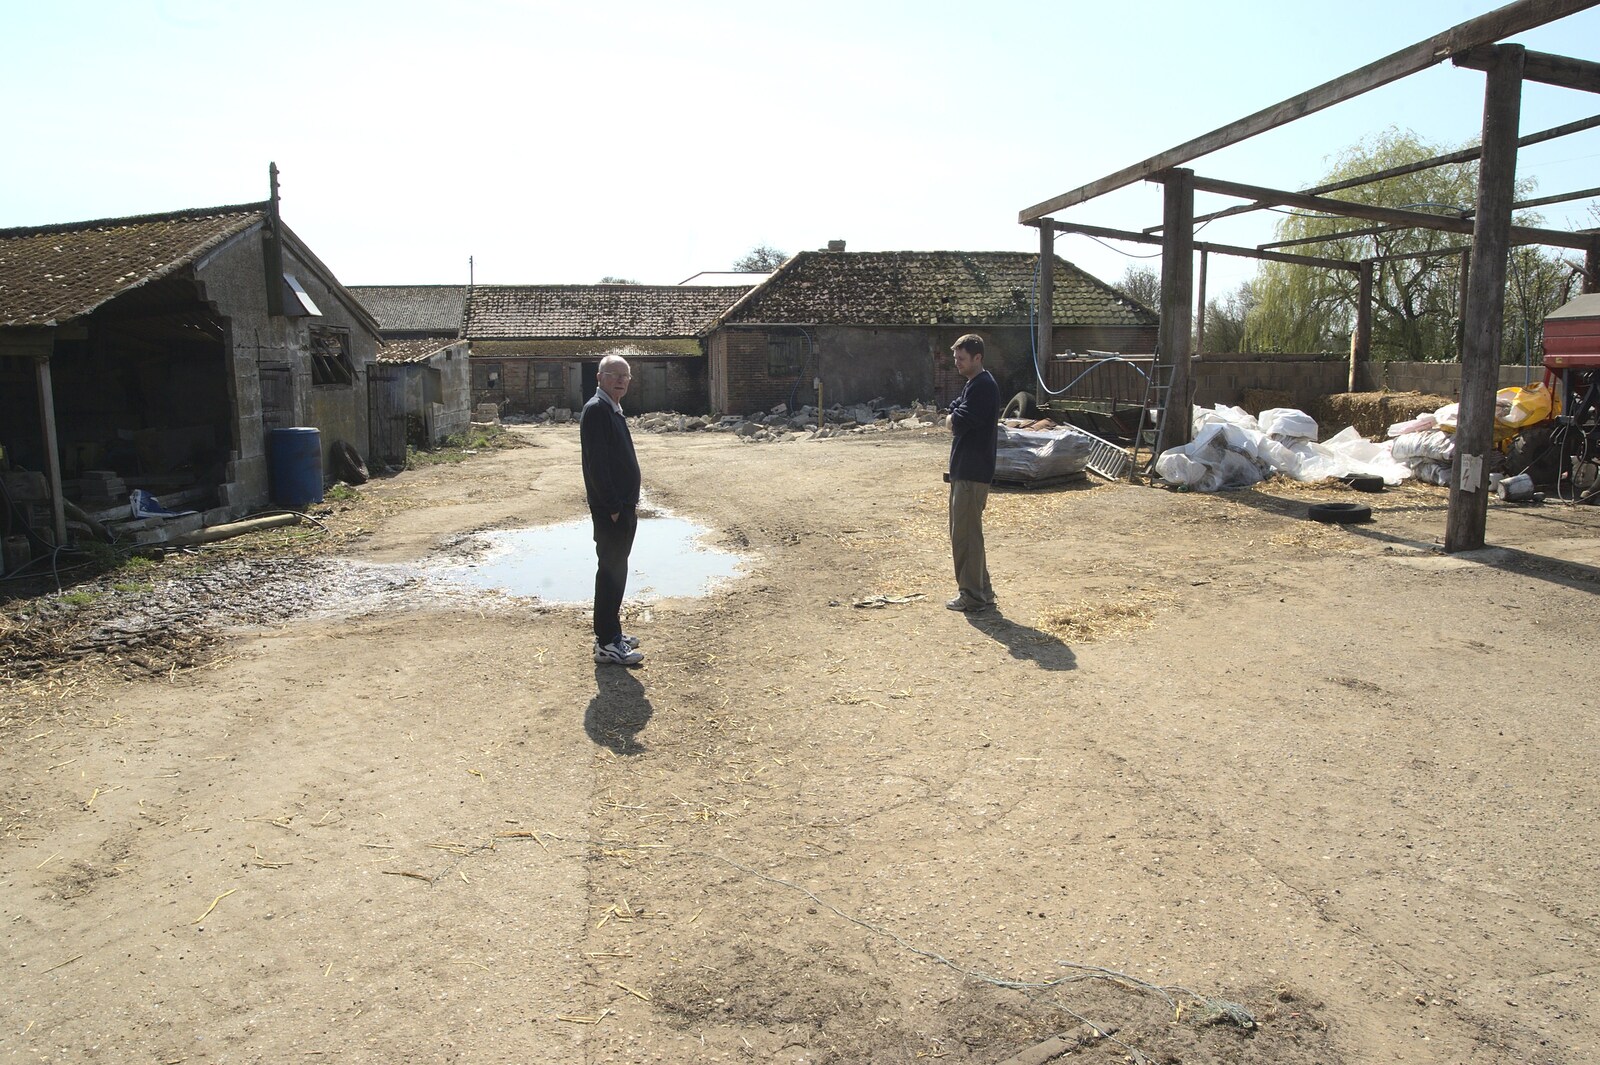 Granddad and Phil and the remains of sheds from Stupid Volcanic Ash: Southwold and Stuston Farm Shop, Suffolk - 18th April 2010